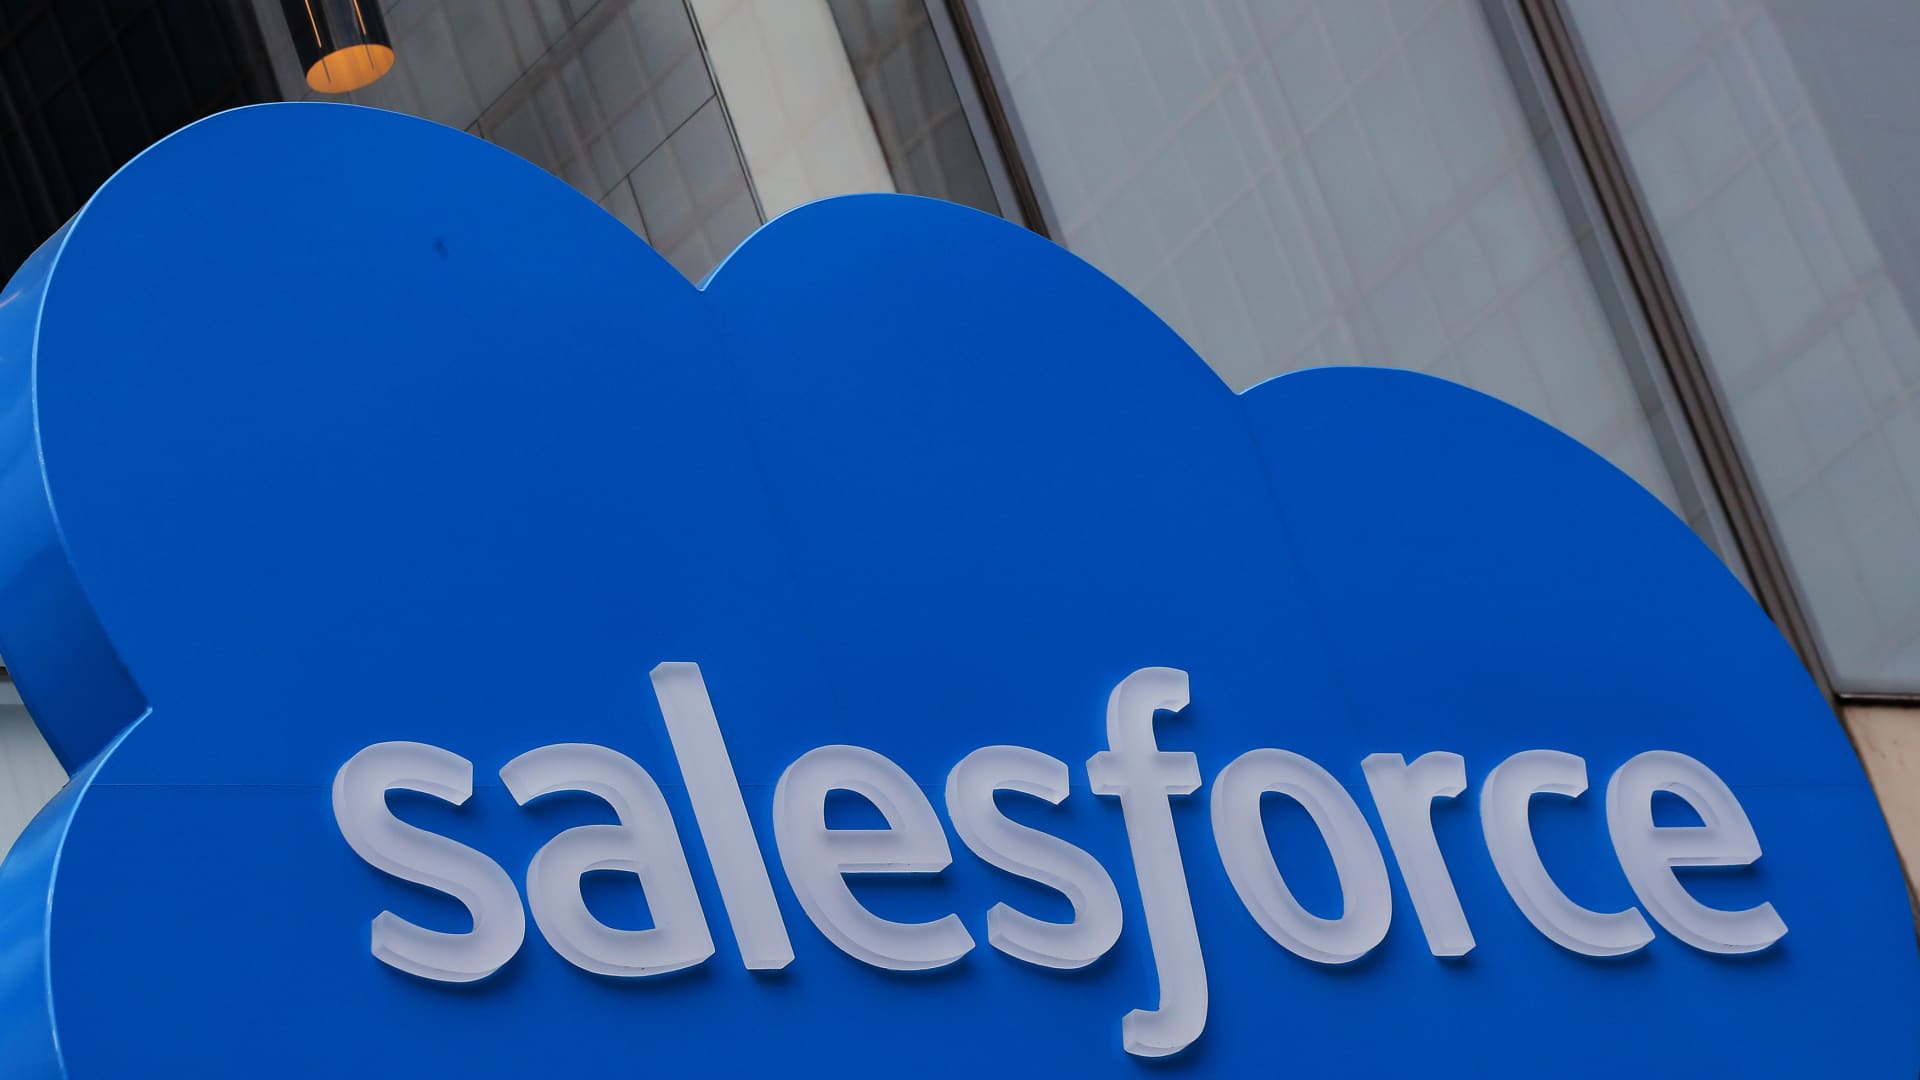 Stocks making the biggest moves midday: Salesforce, Kohl’s, HP, Best Buy and more